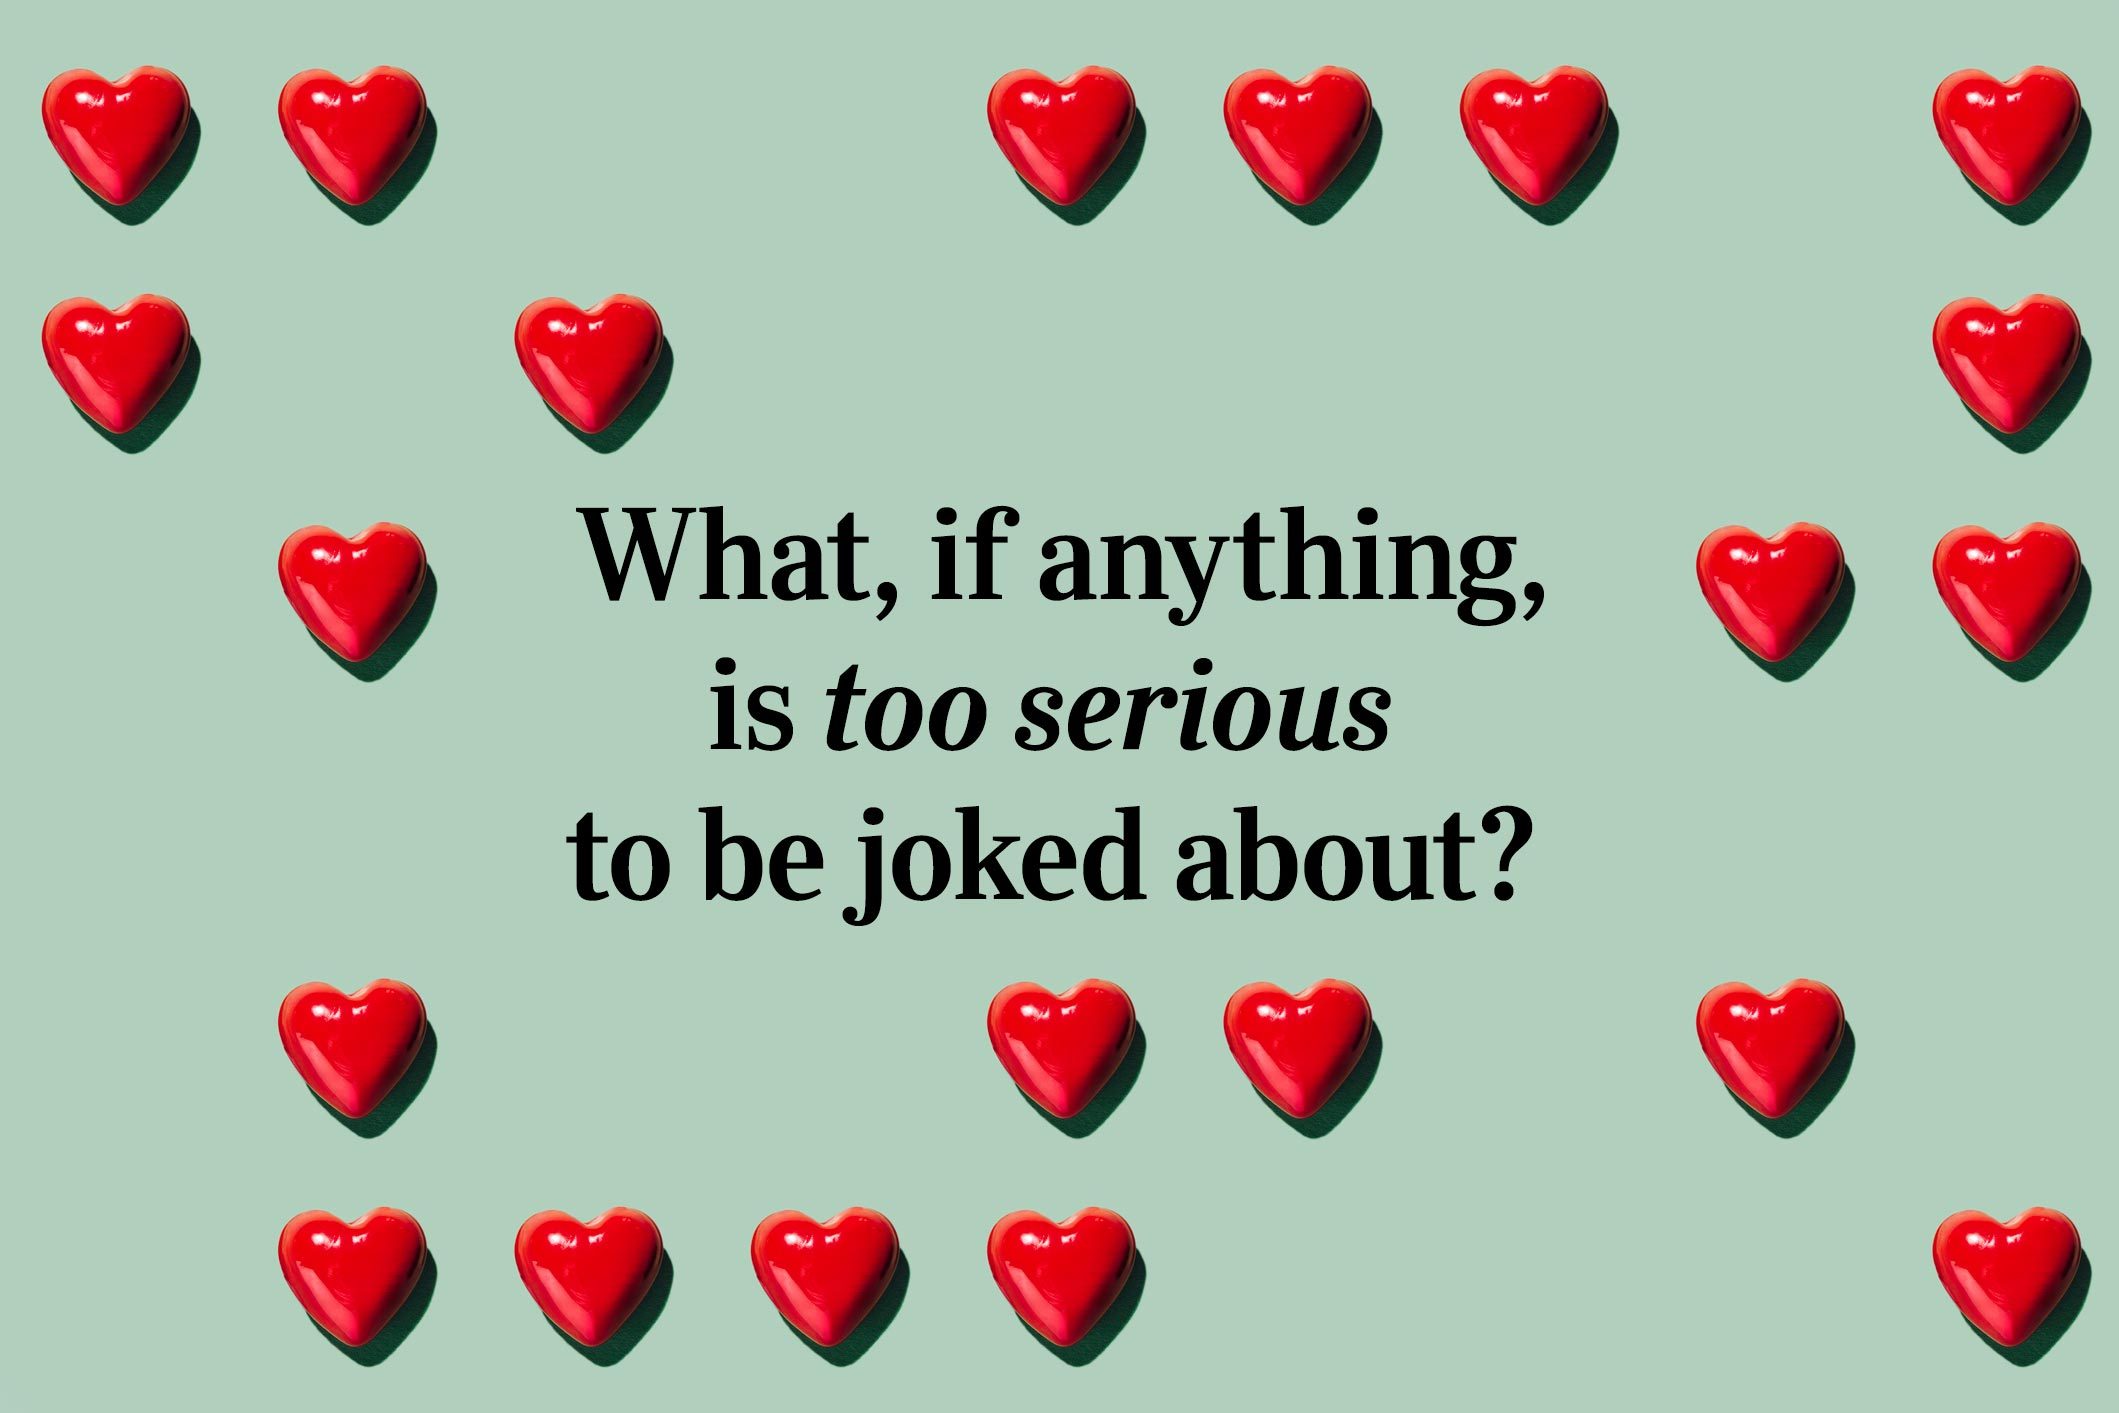 <p>What, if anything, is too serious to be joked about?</p> <p>If you're feeling humorous, try cracking these <a href="https://www.rd.com/list/short-jokes/">short jokes</a>.</p>